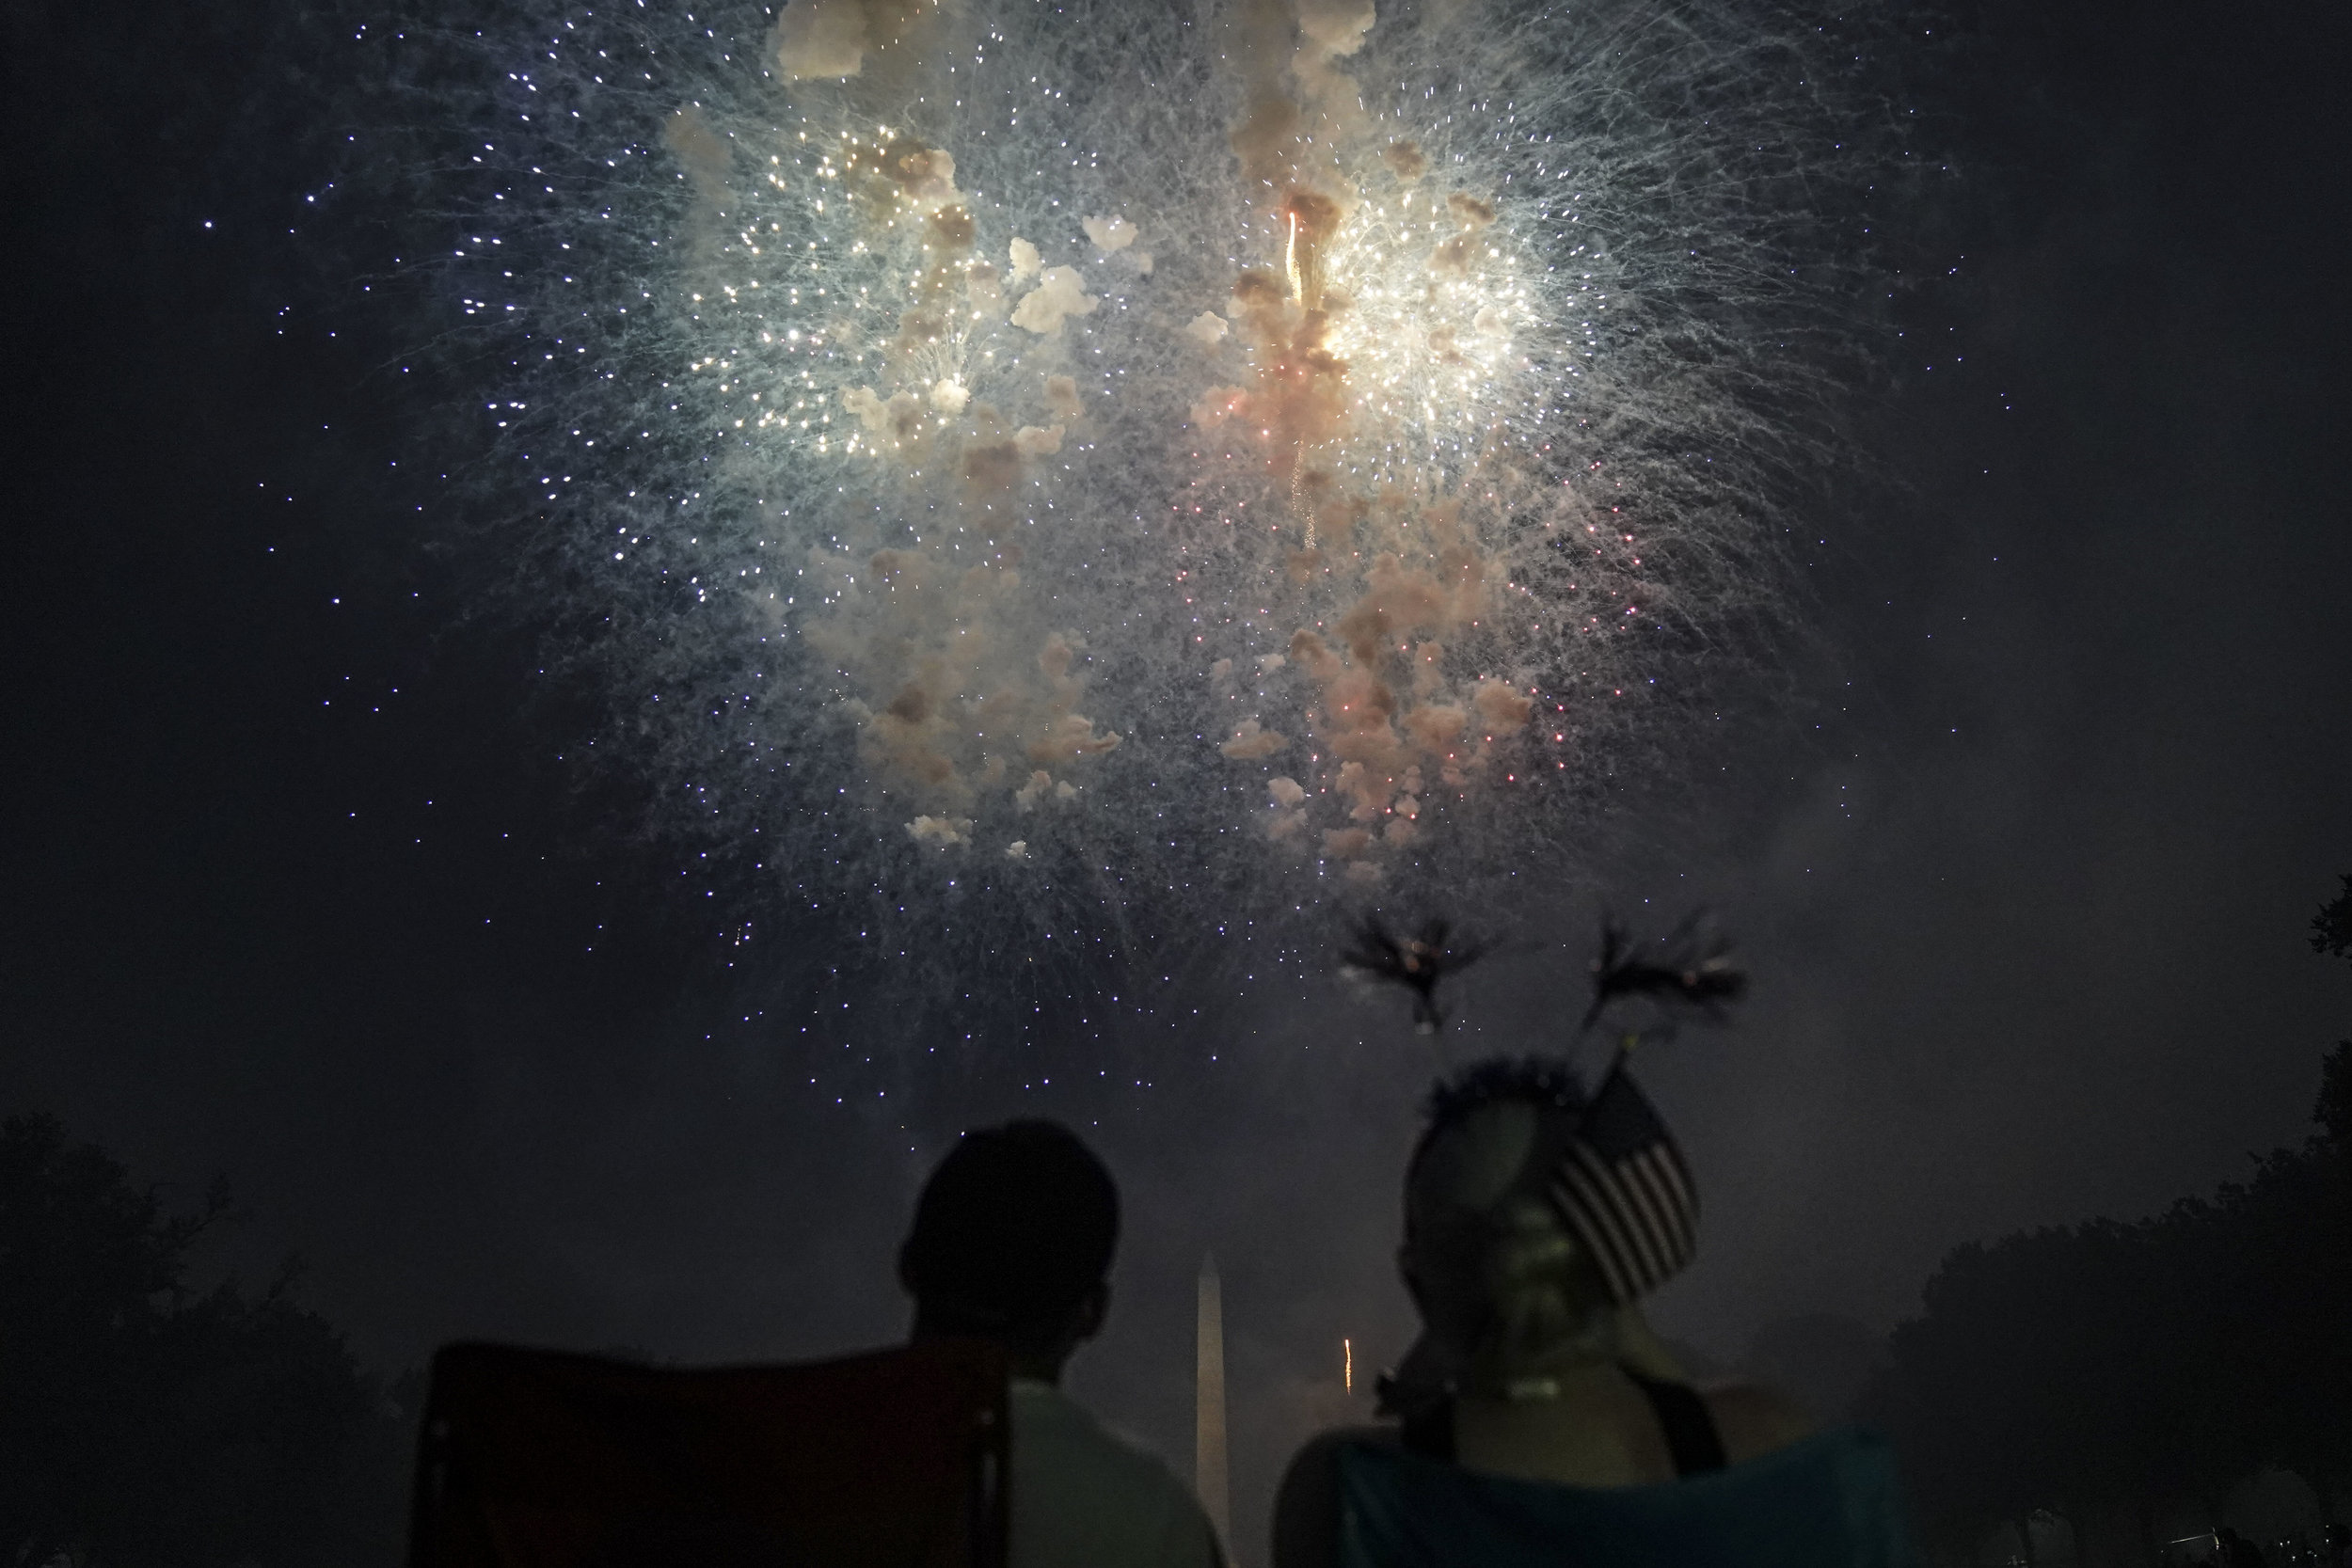   People watch fireworks during the 4th of July Independence Day celebrations at the National Mall in Washington.  